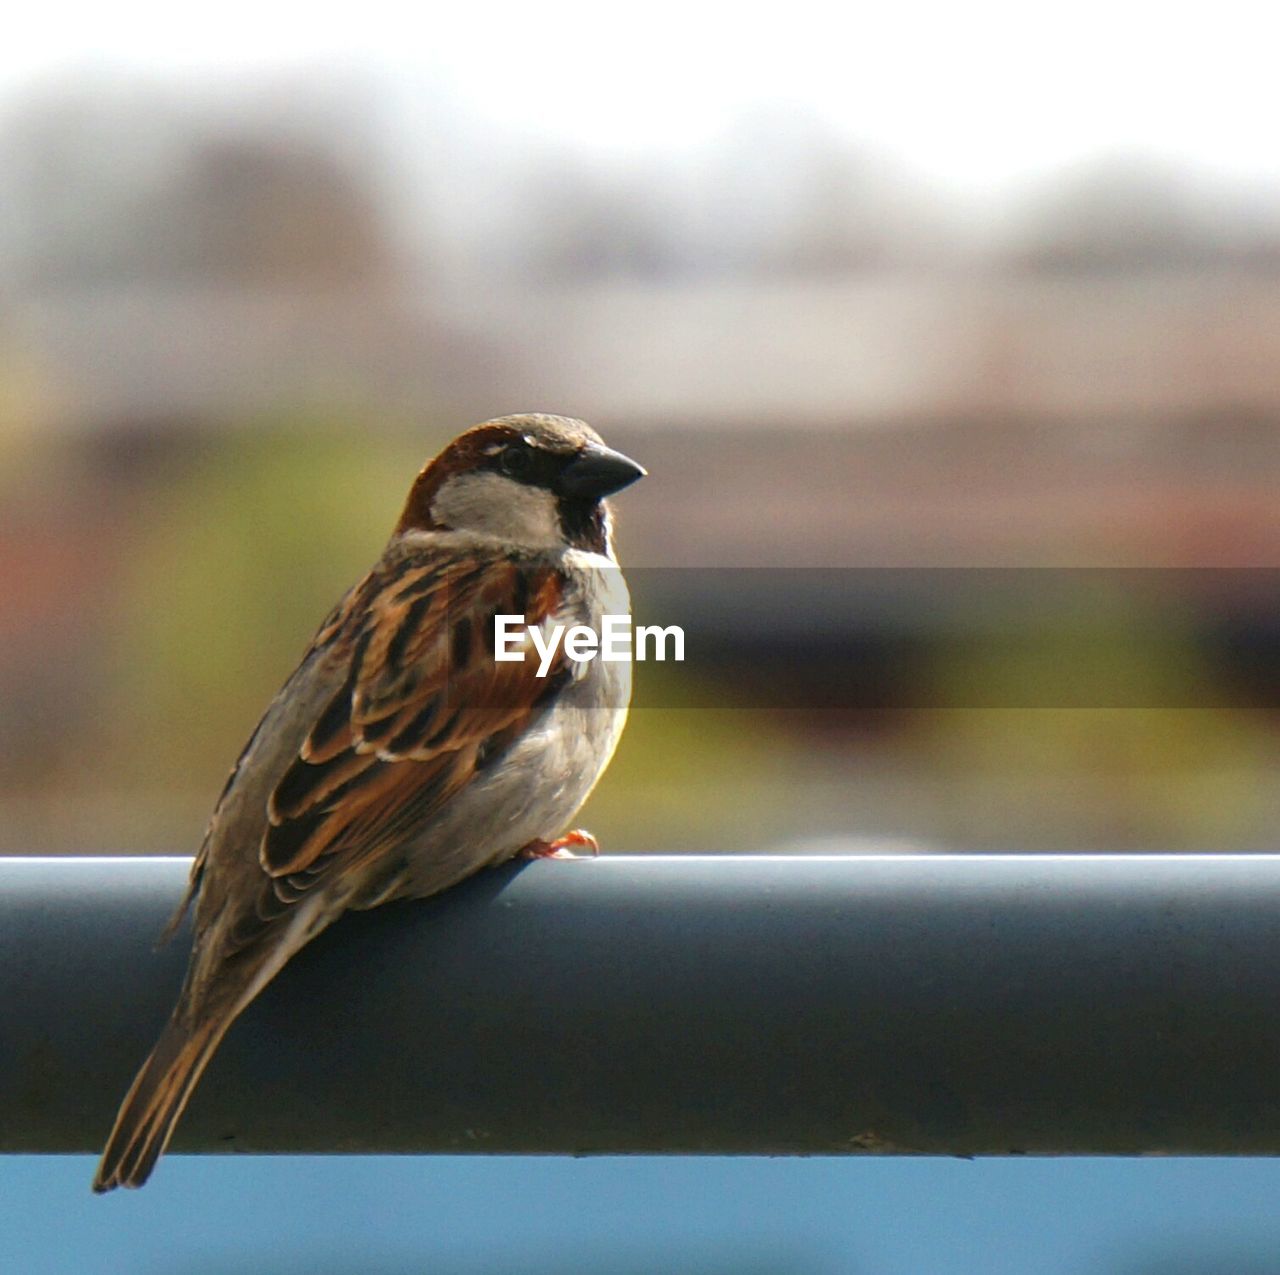 Close-up of a bird on railing against blurred background